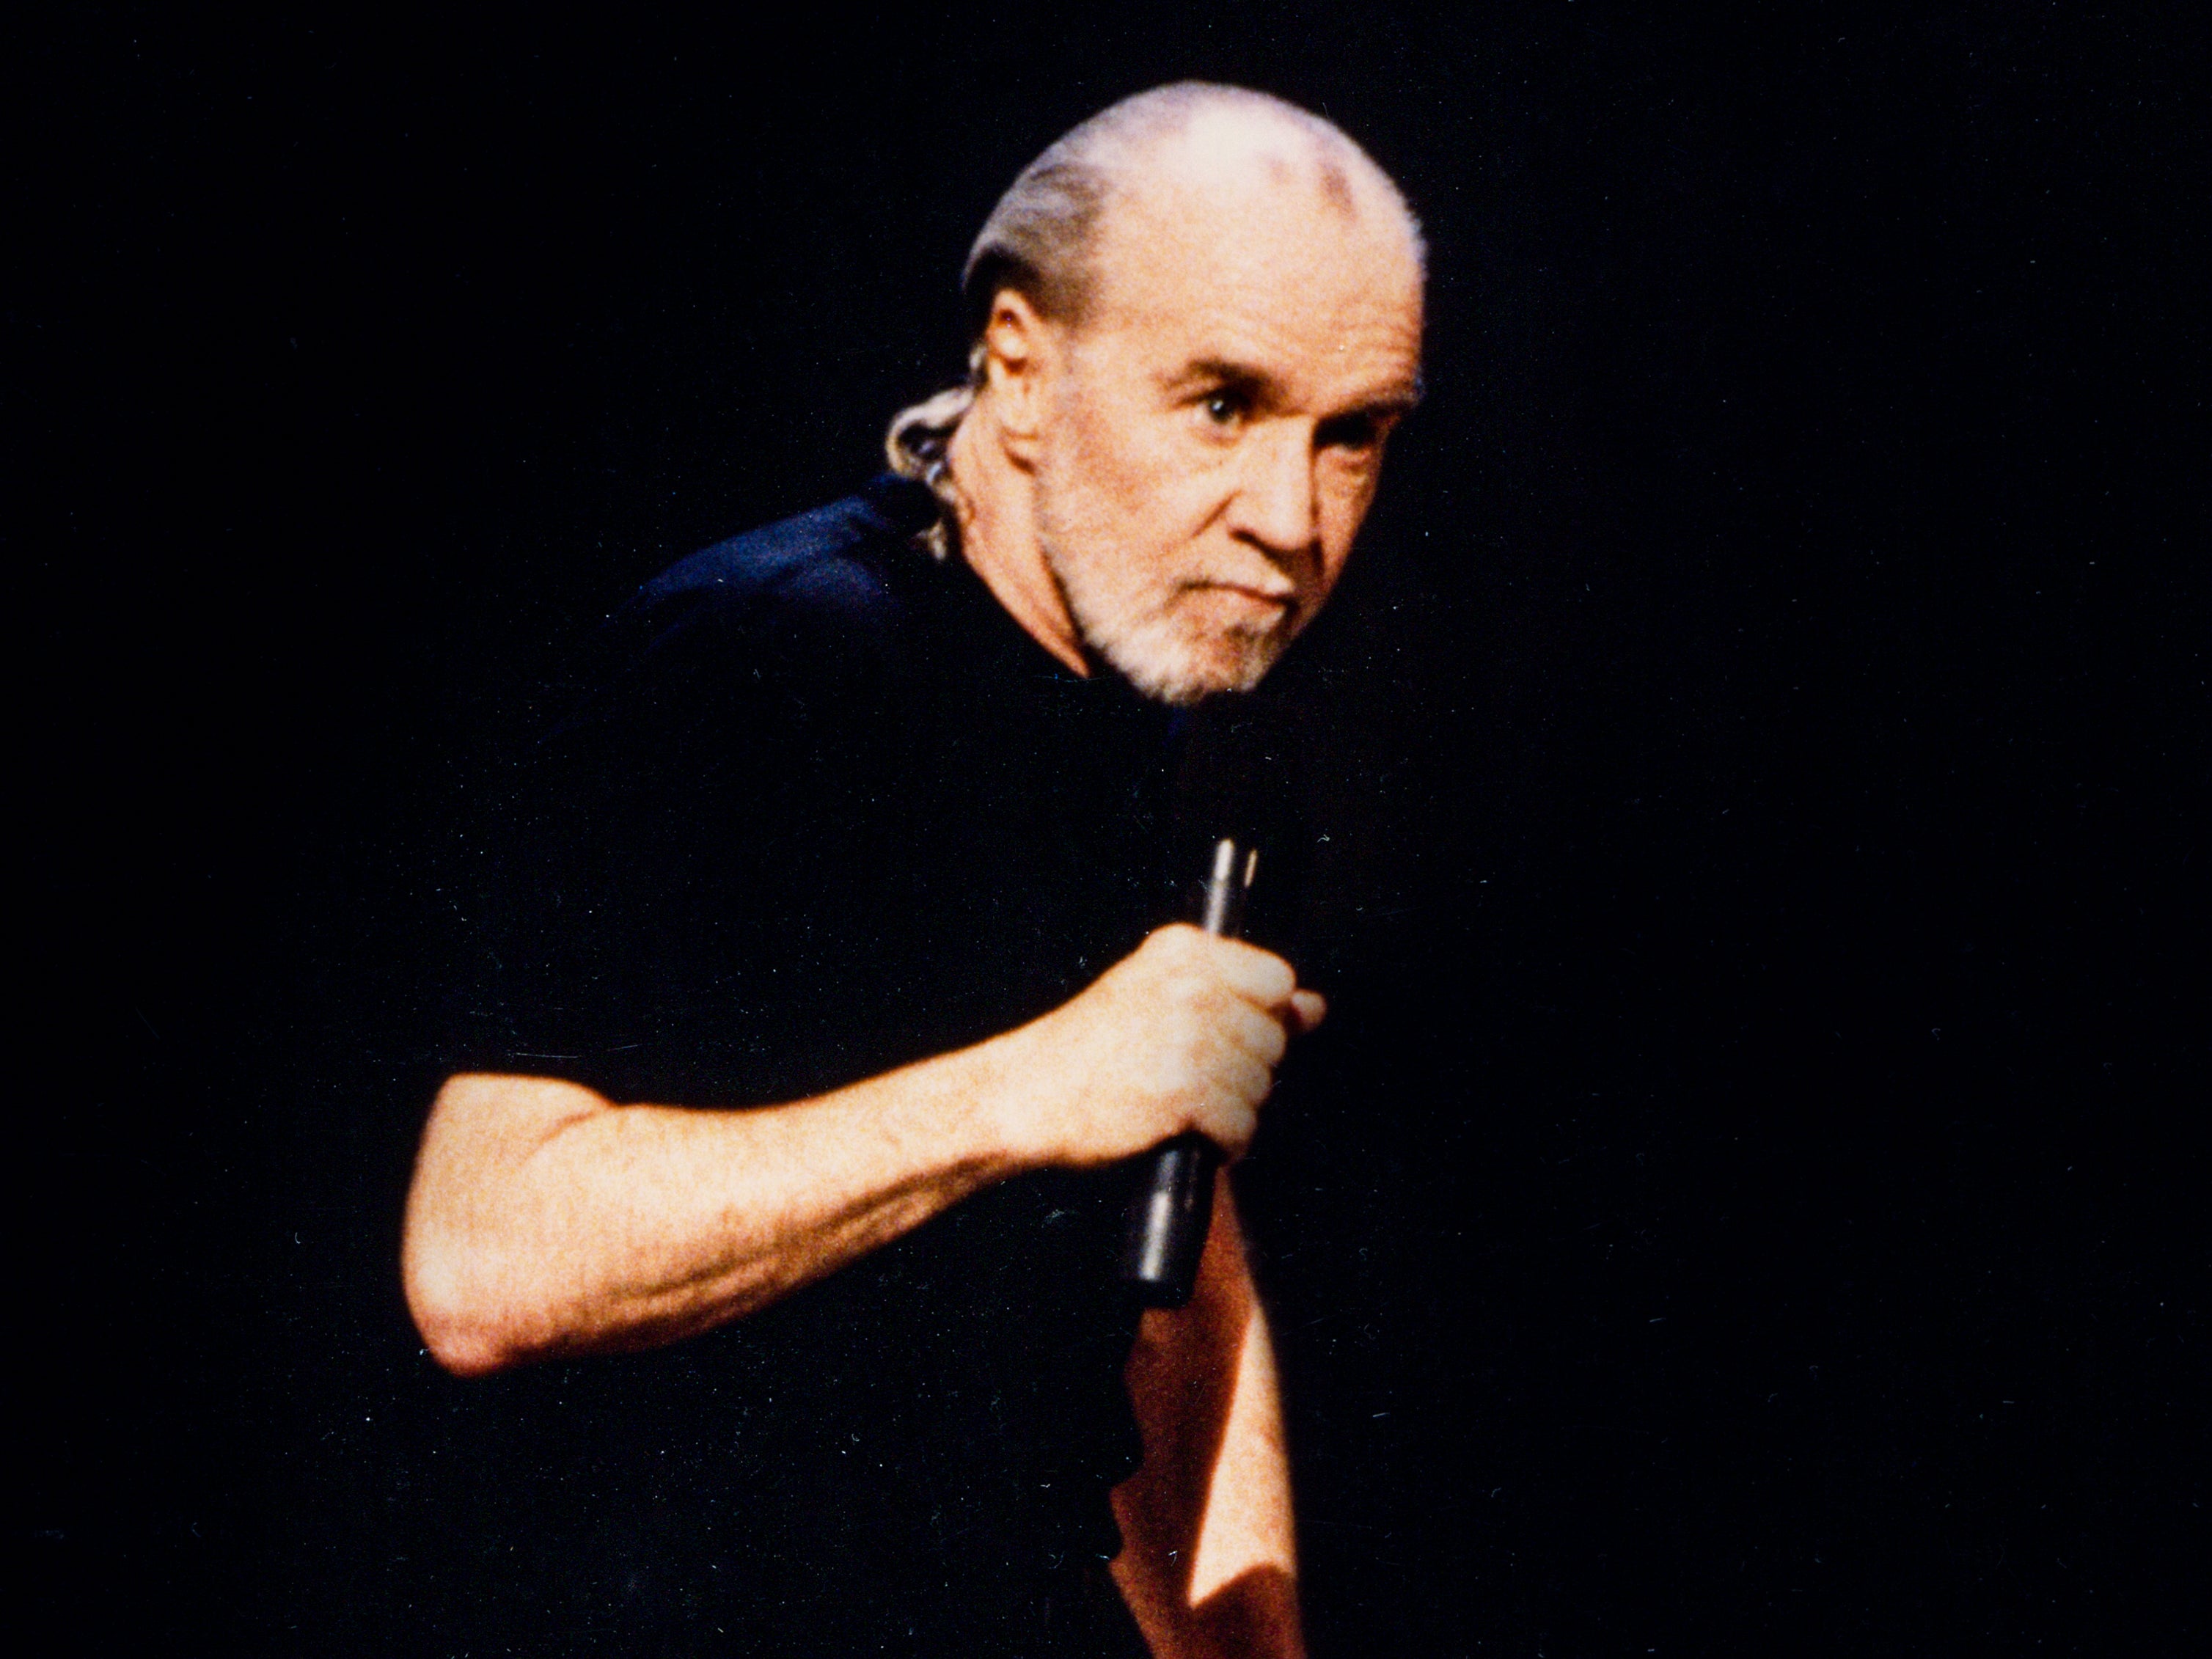 Carlin was known for a number of groundbreaking routines, including his foul-mouthed ‘Seven Words You Can Never Say on TV’ bit